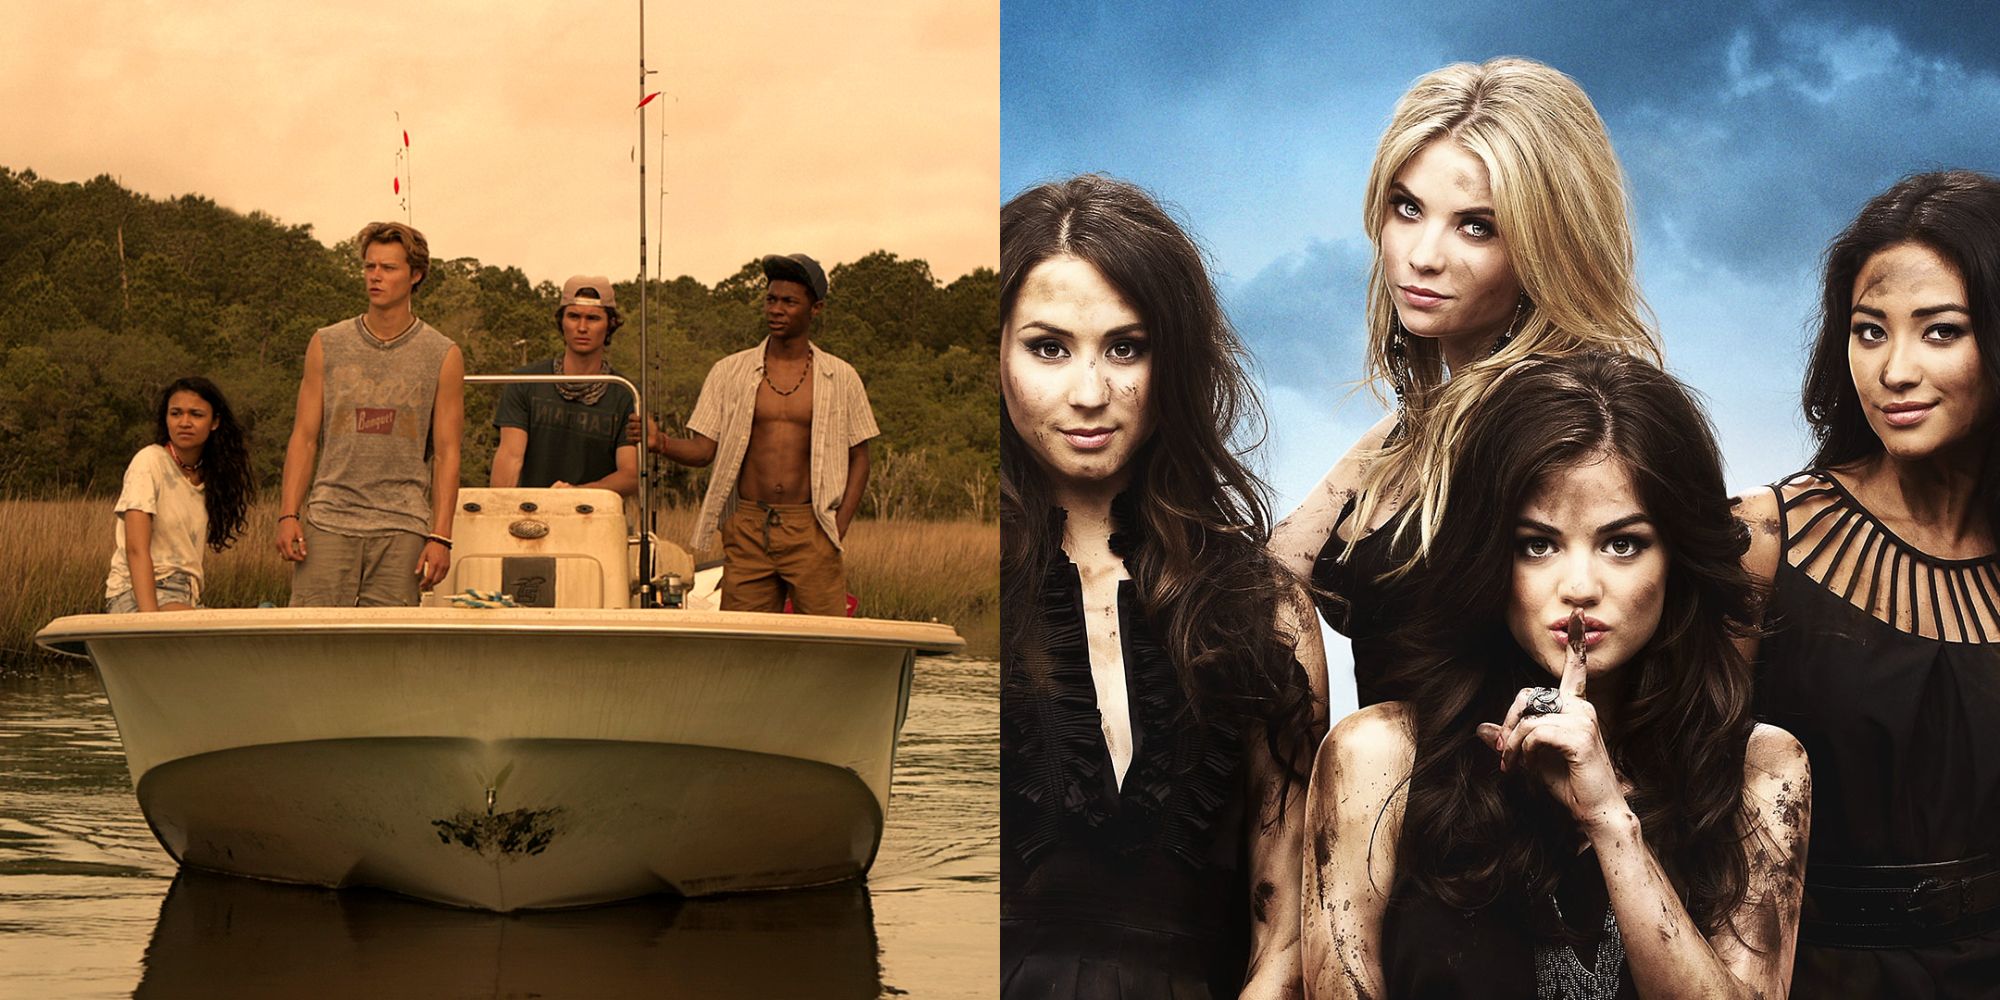 Promo images for Outer Banks and Pretty Little Liars